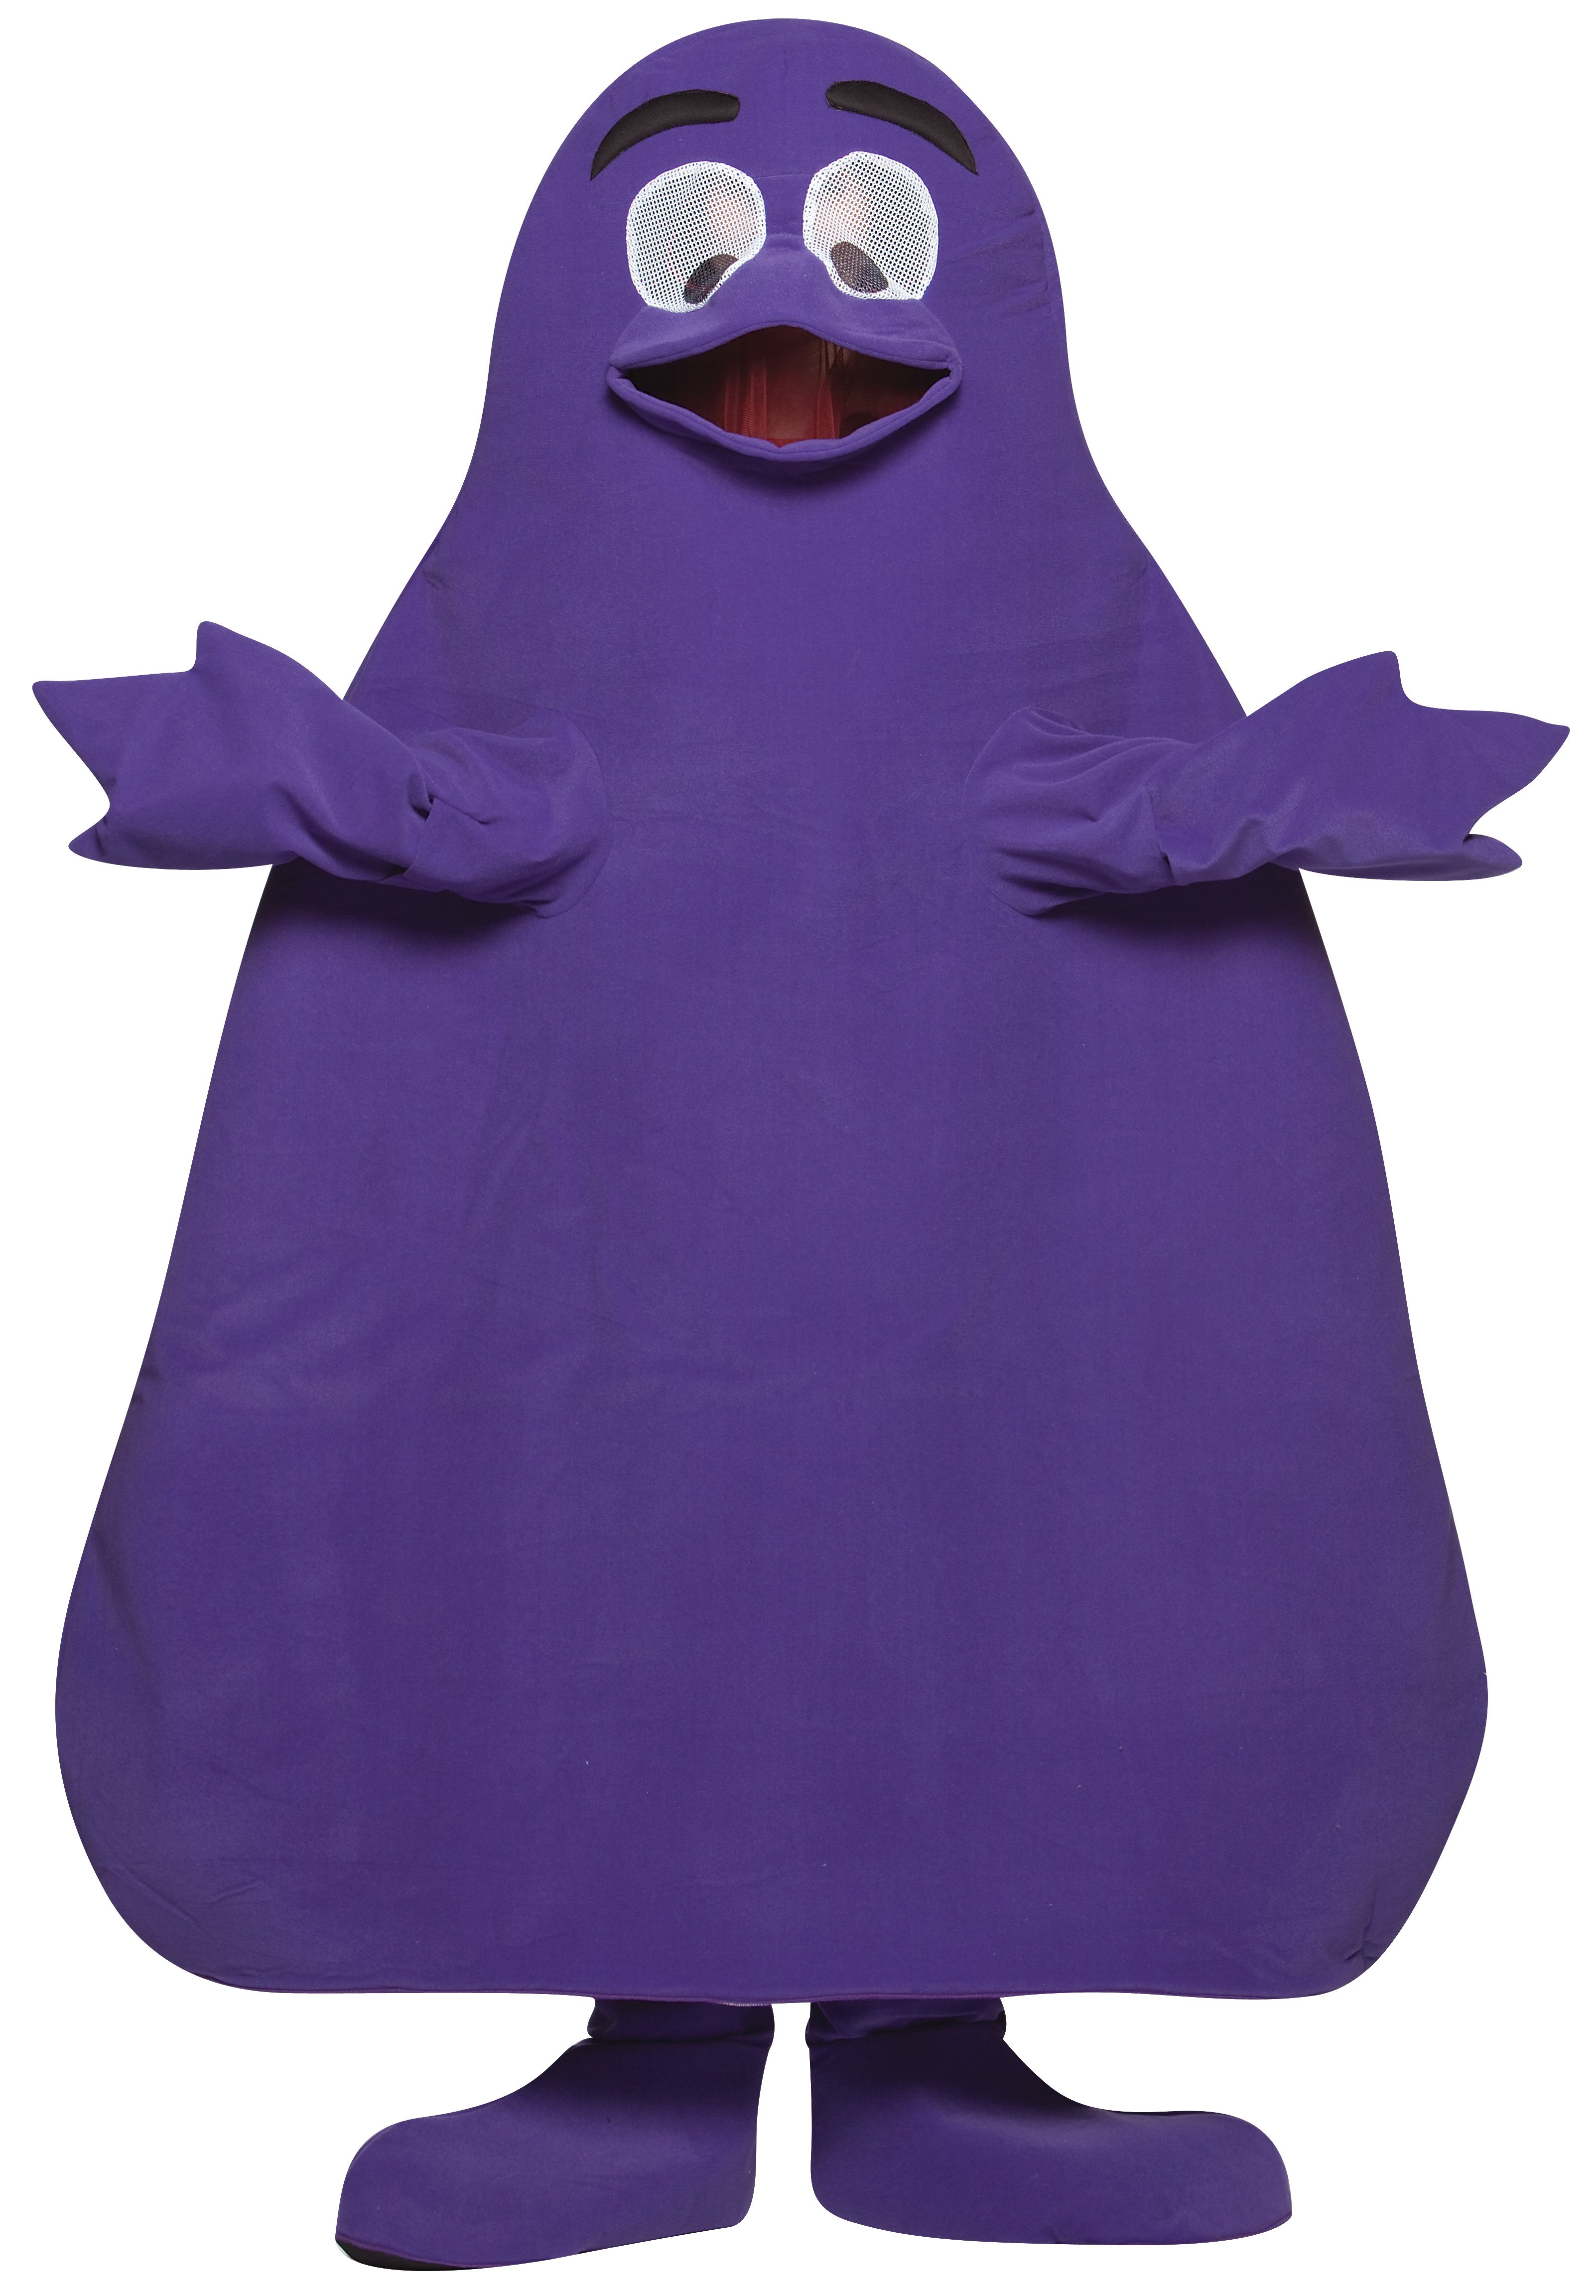 ... fer around. Be remembered. Be legendary. Nothing can stop the Grimace